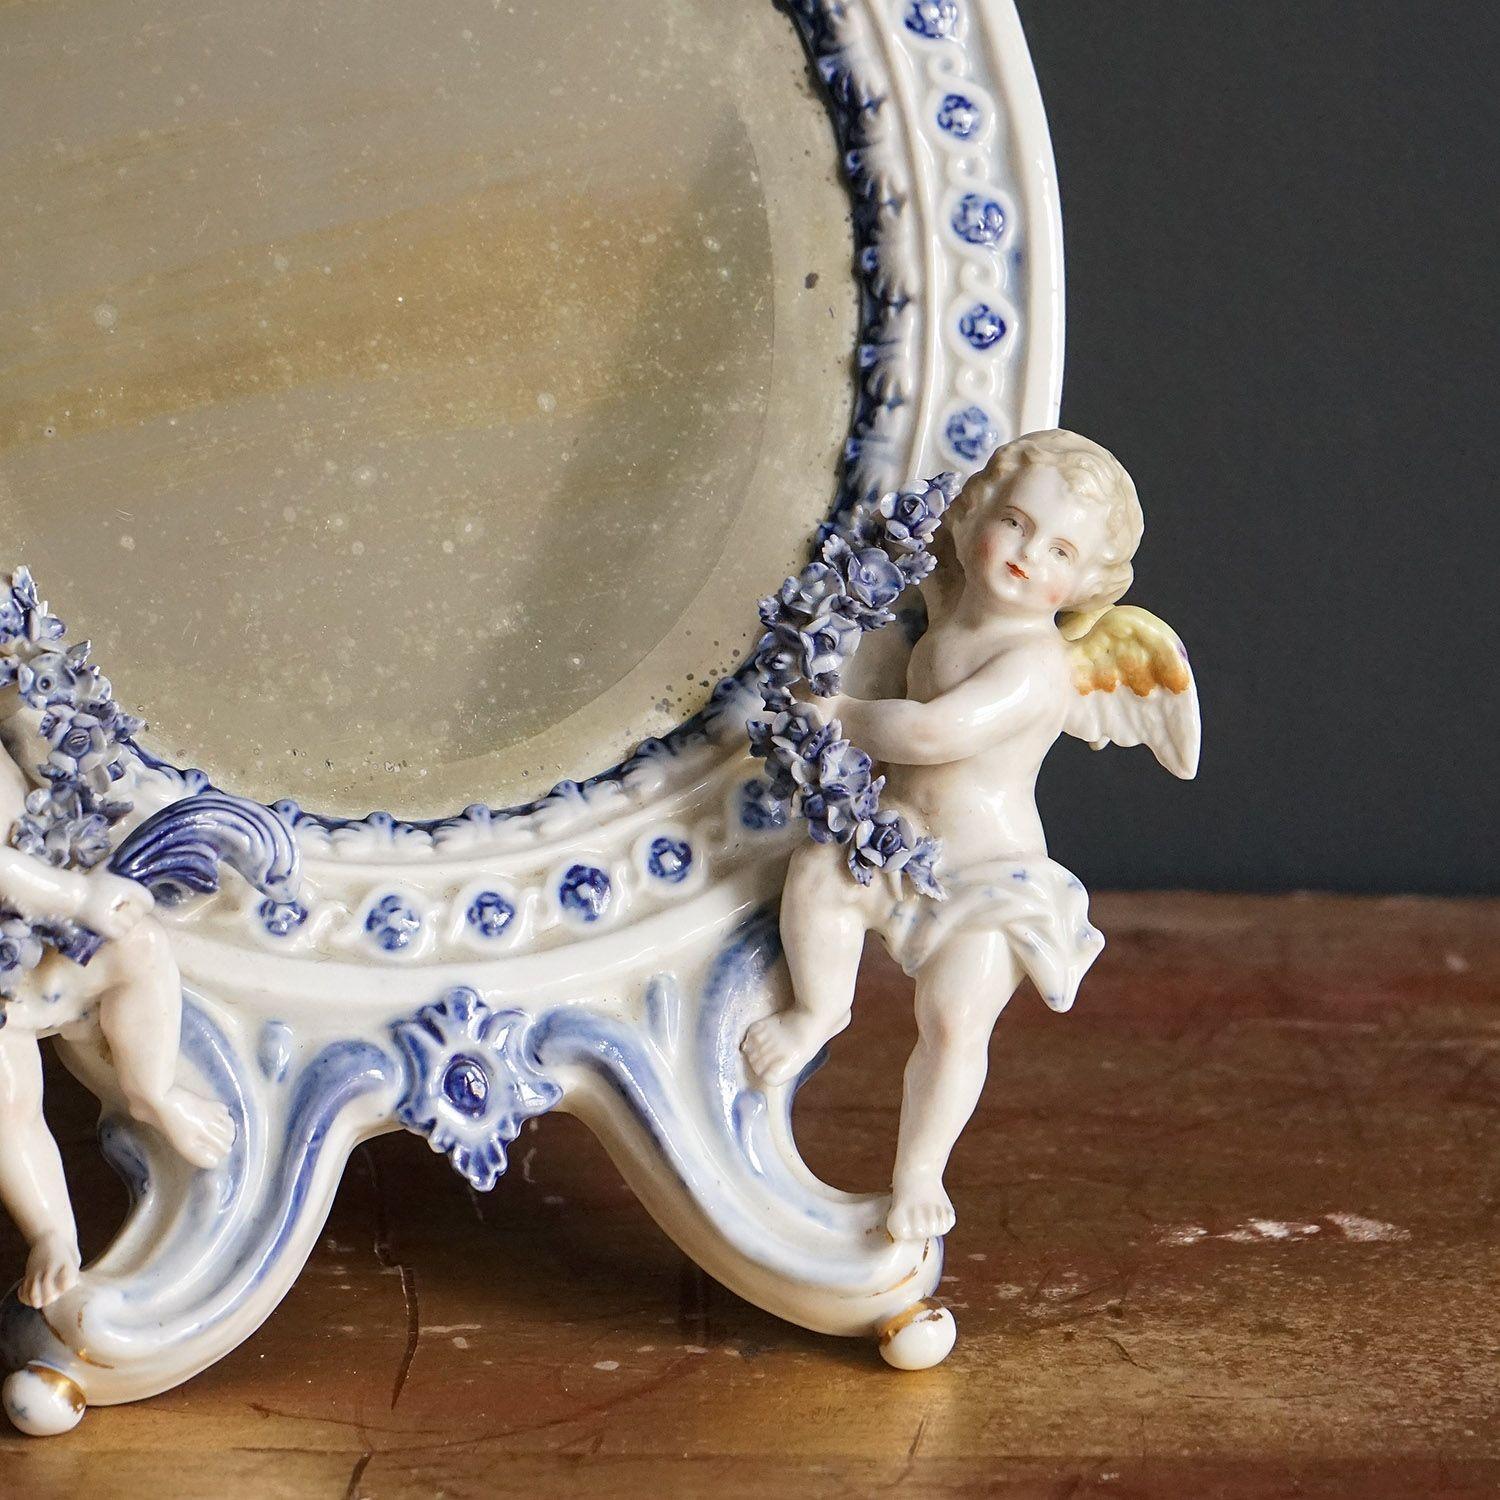 Ceramic Oval Dressing Mirror

OTT in a fabulous way, a porcelain mirror in the rococo style encrusted with swags, bows and flowers flanked by two cherubs.

Original bevelled mirror plate and wooden easel back.

Circa 1880 in date.

It is in very